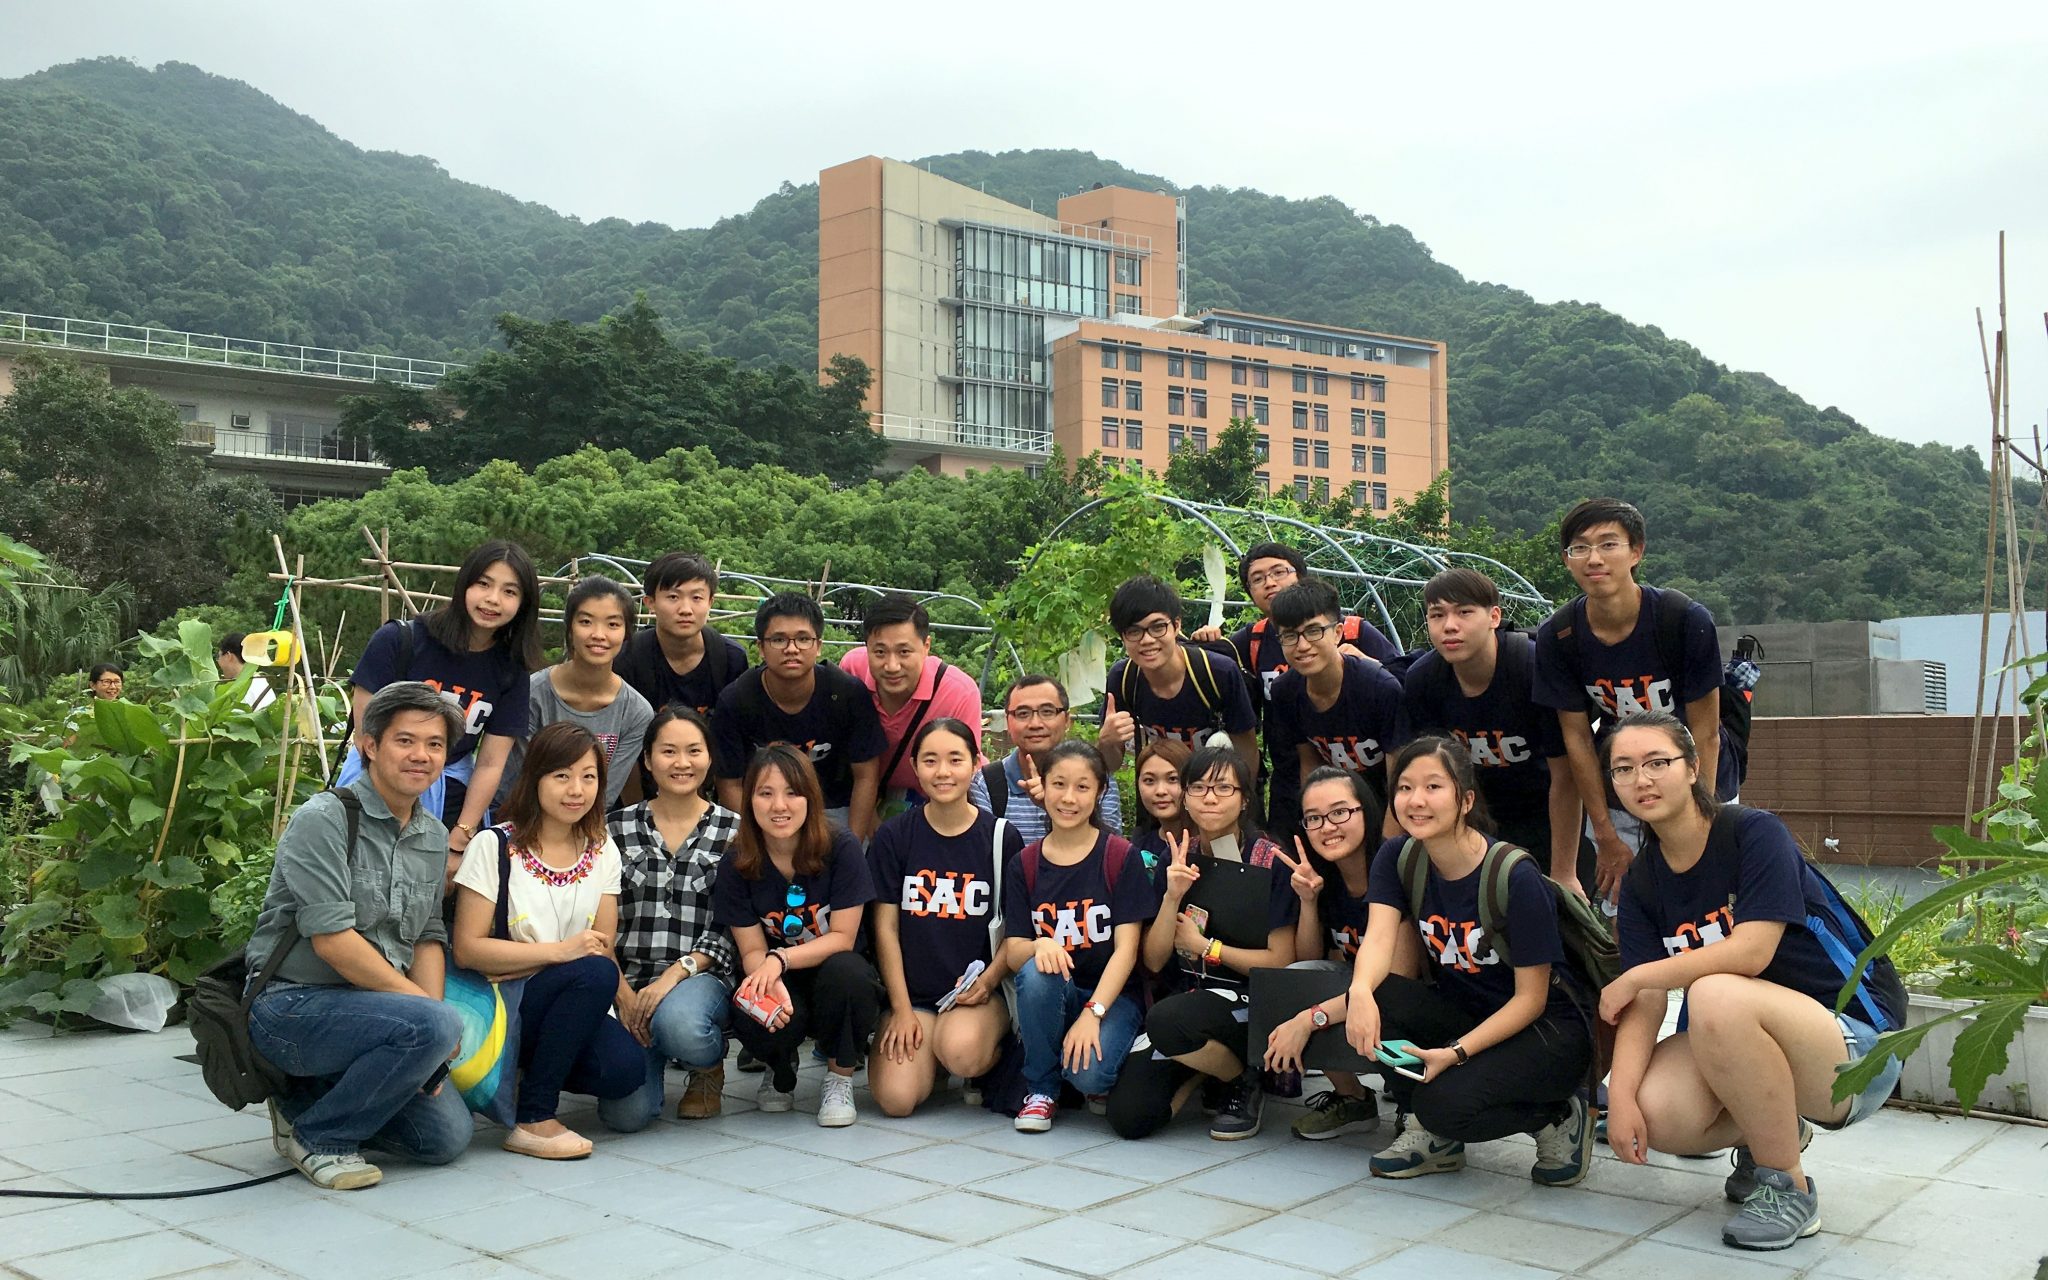 Group photo at the rooftop farm in The University of Hong Kong. 在香港大學的天台有機種植園留影。 